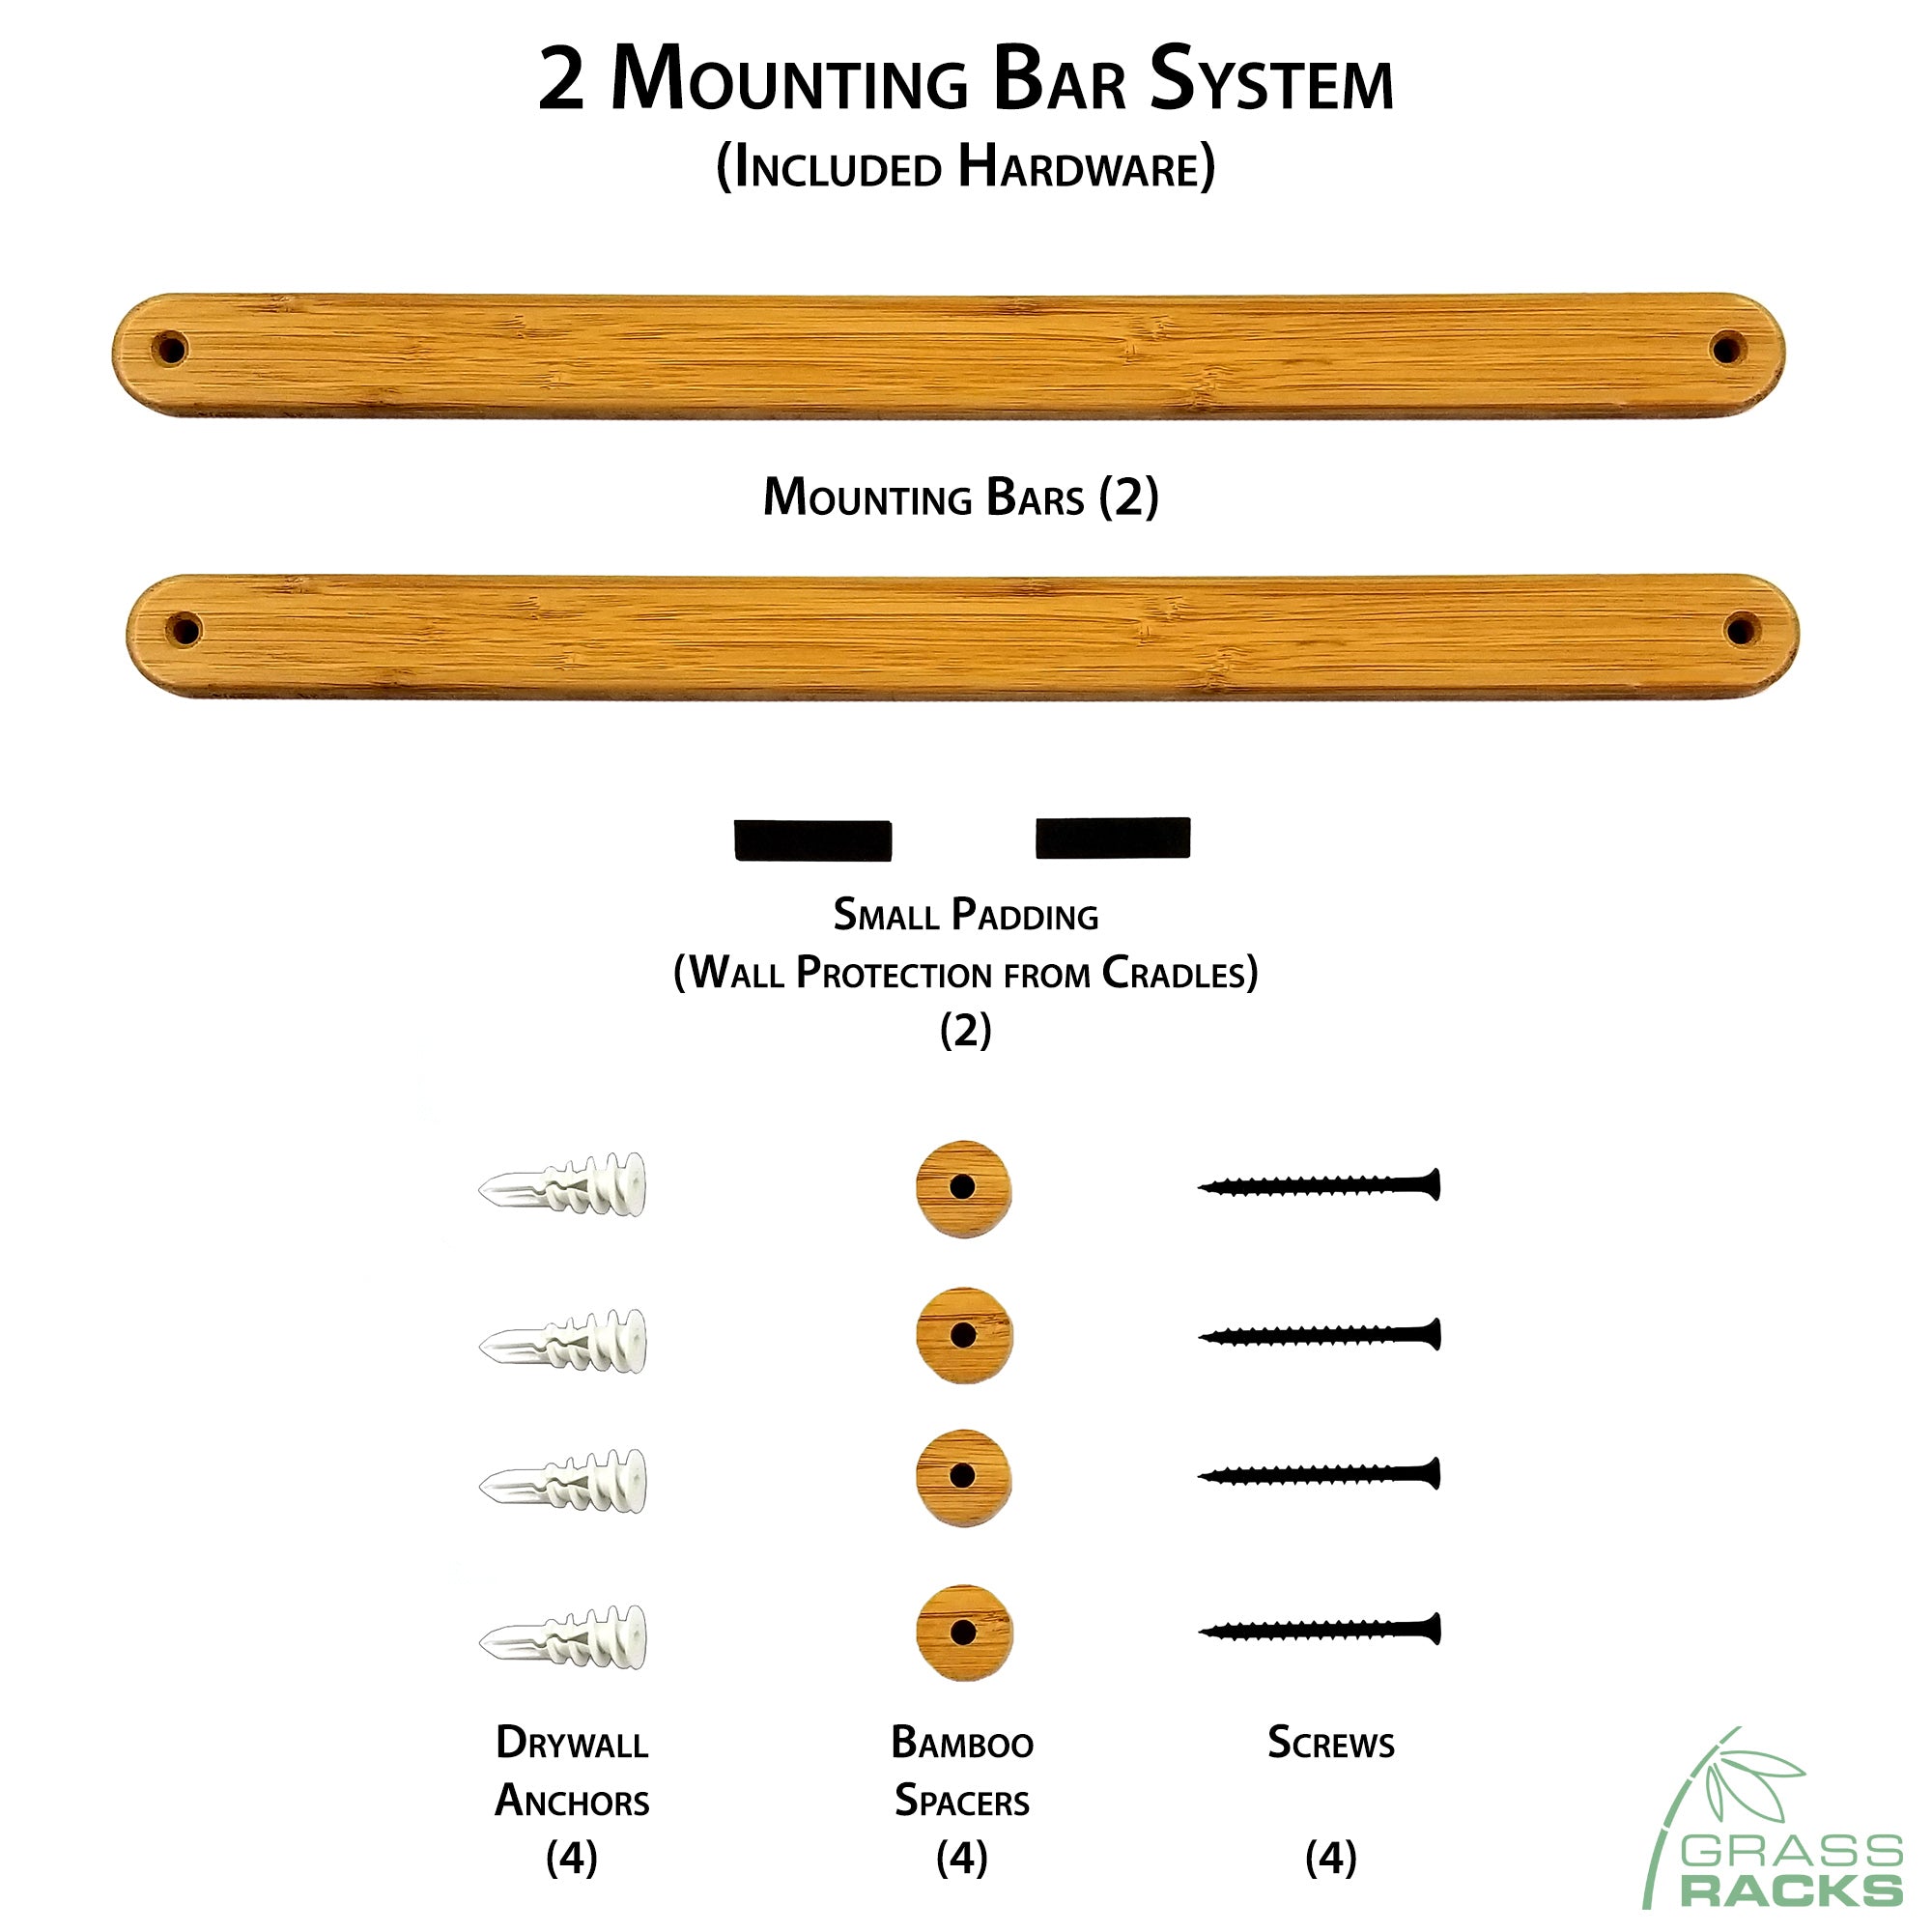 Surfboard Wall Rack Installation Hardware & Mounting System - The Kaua'i Series